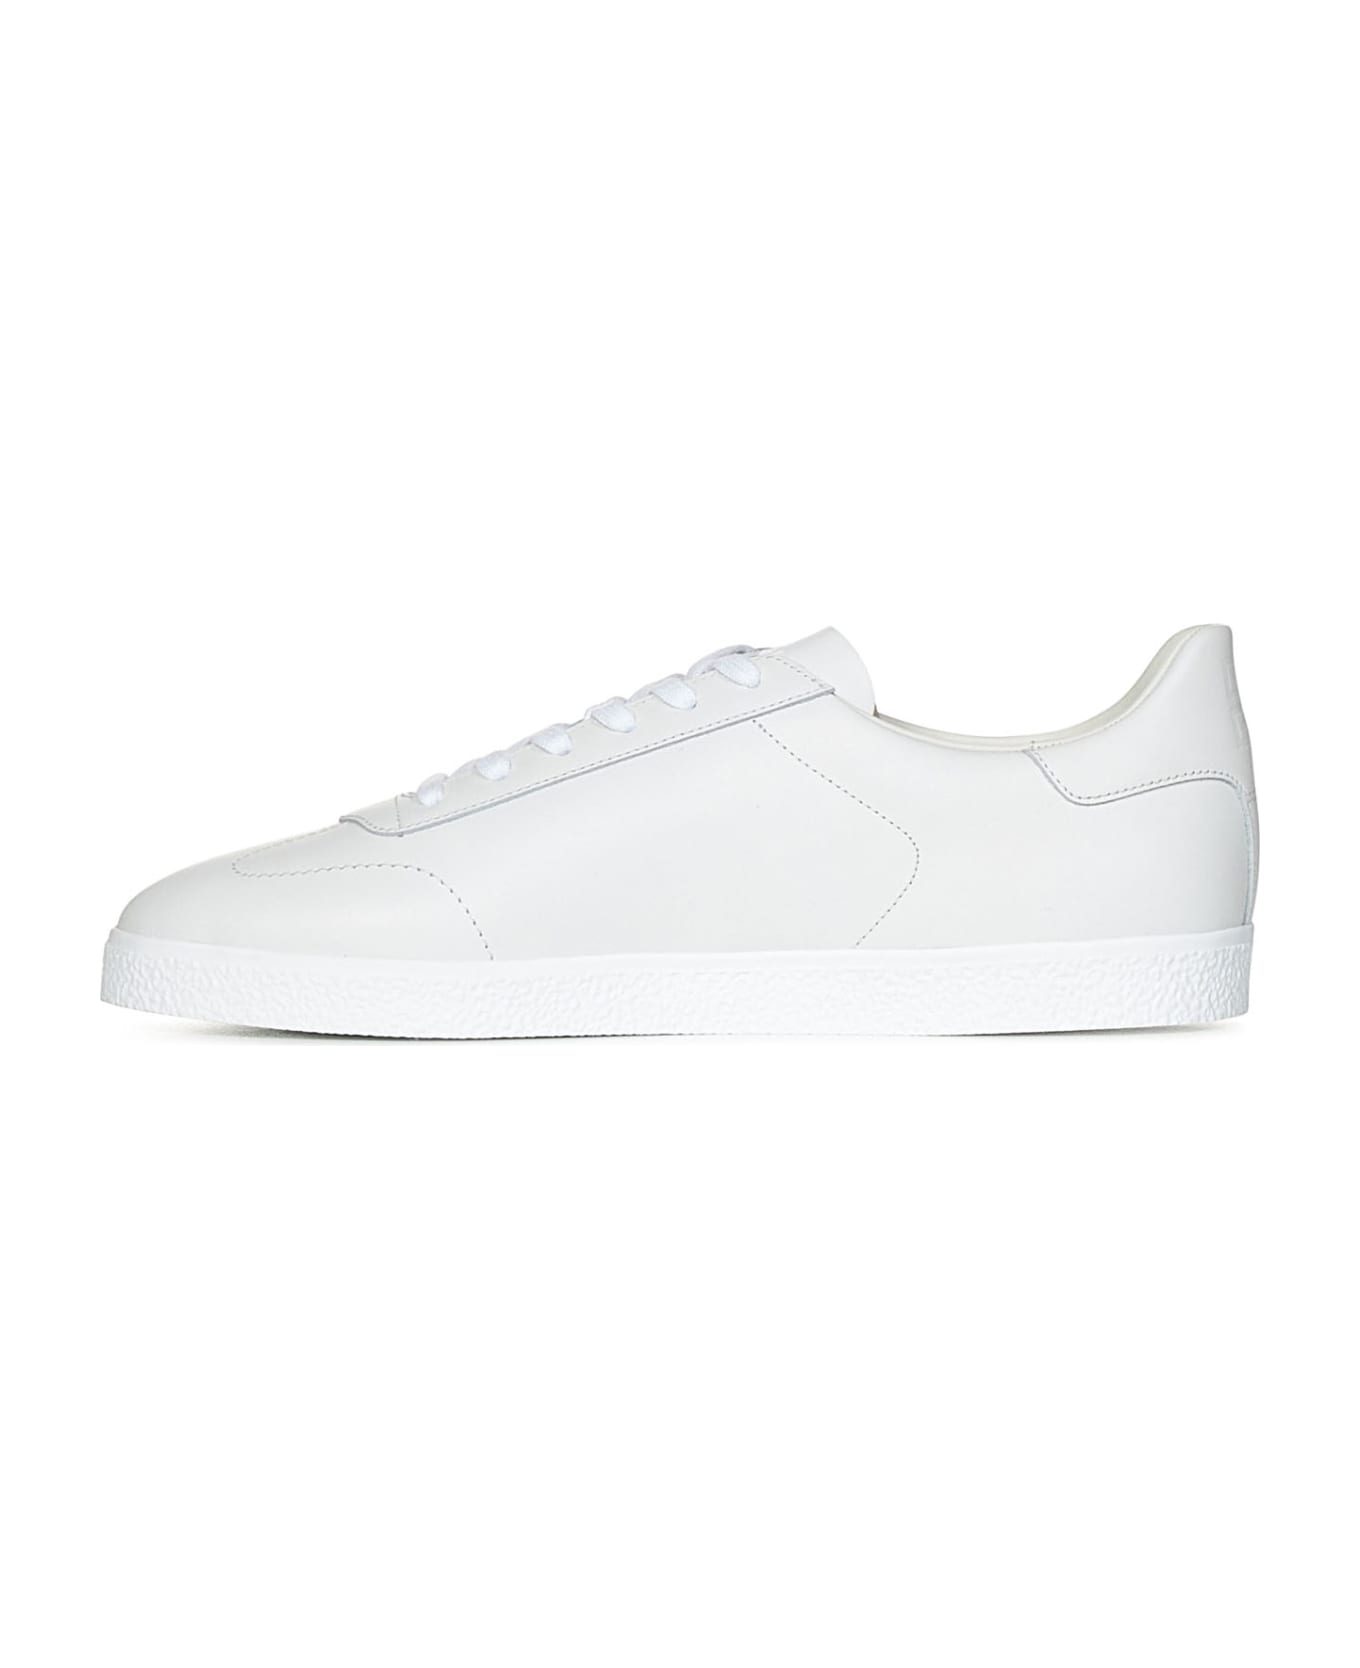 Givenchy Town Sneakers - White スニーカー